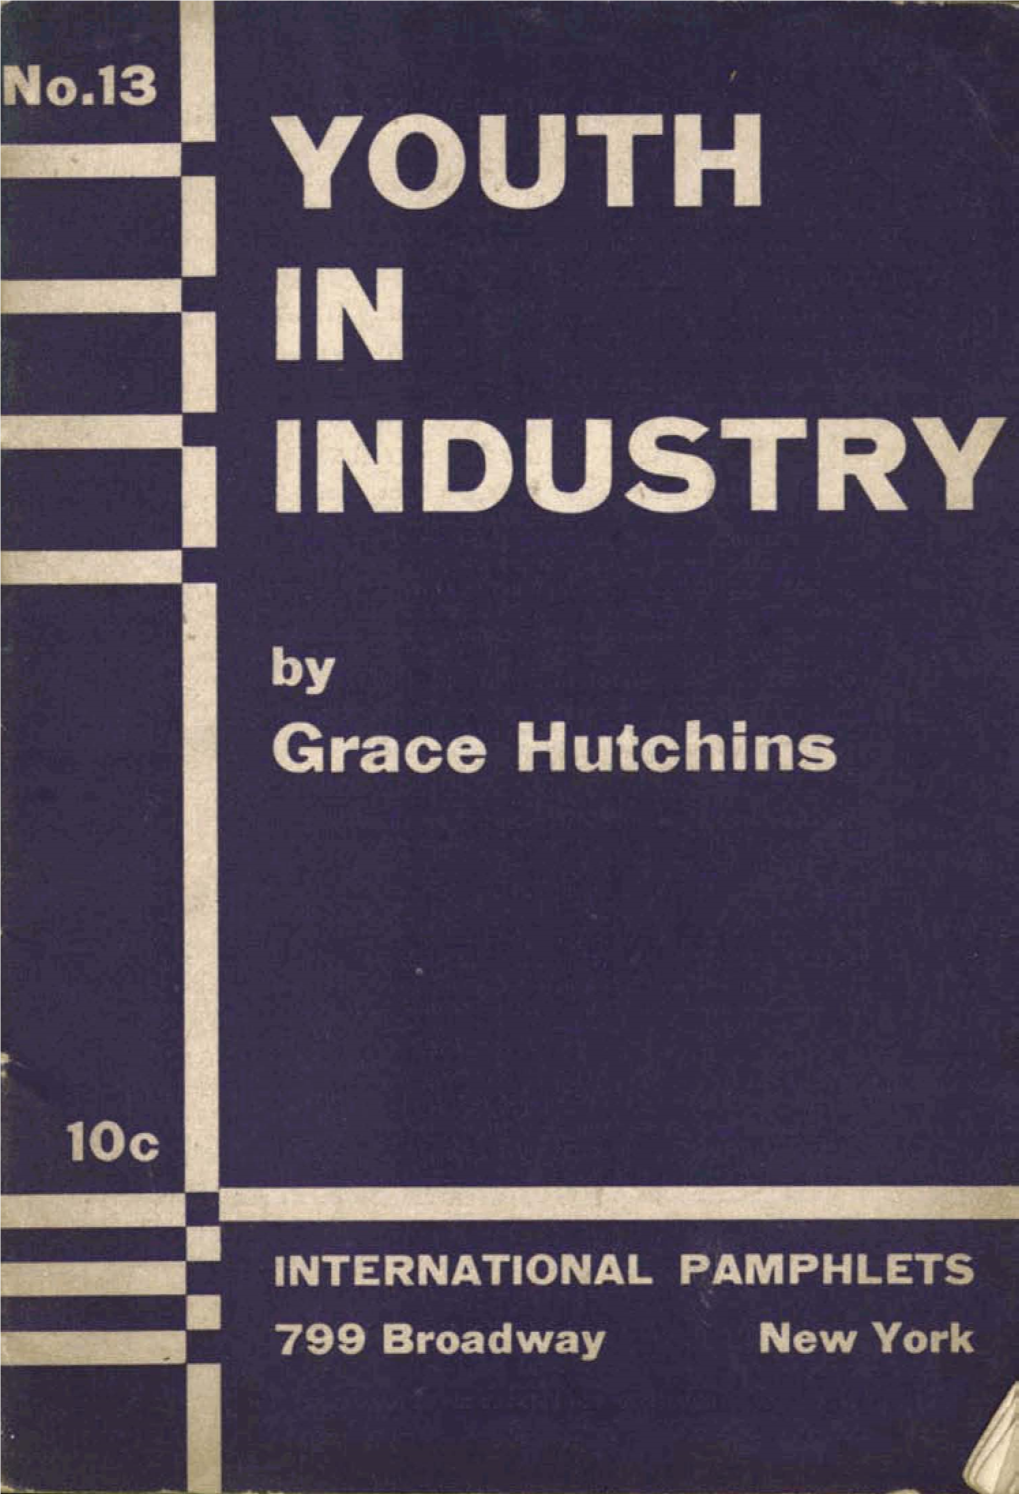 YOUTH in INDUSTRY by Grace Hutchins